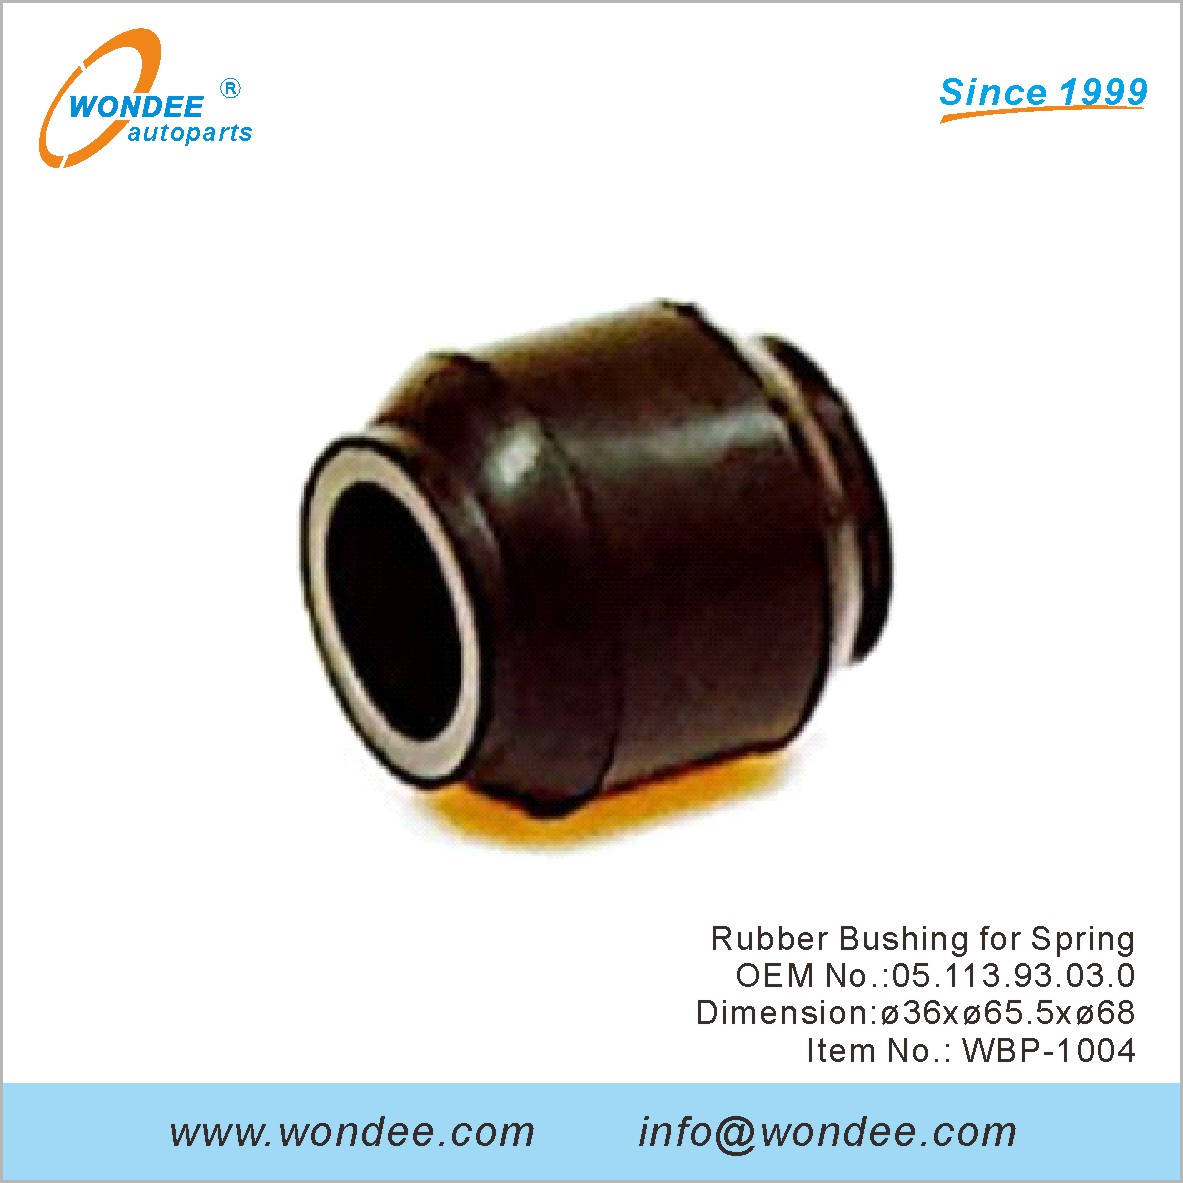 Rubber Bushing for Spring OEM 0511393030 for BPW from WONDEE